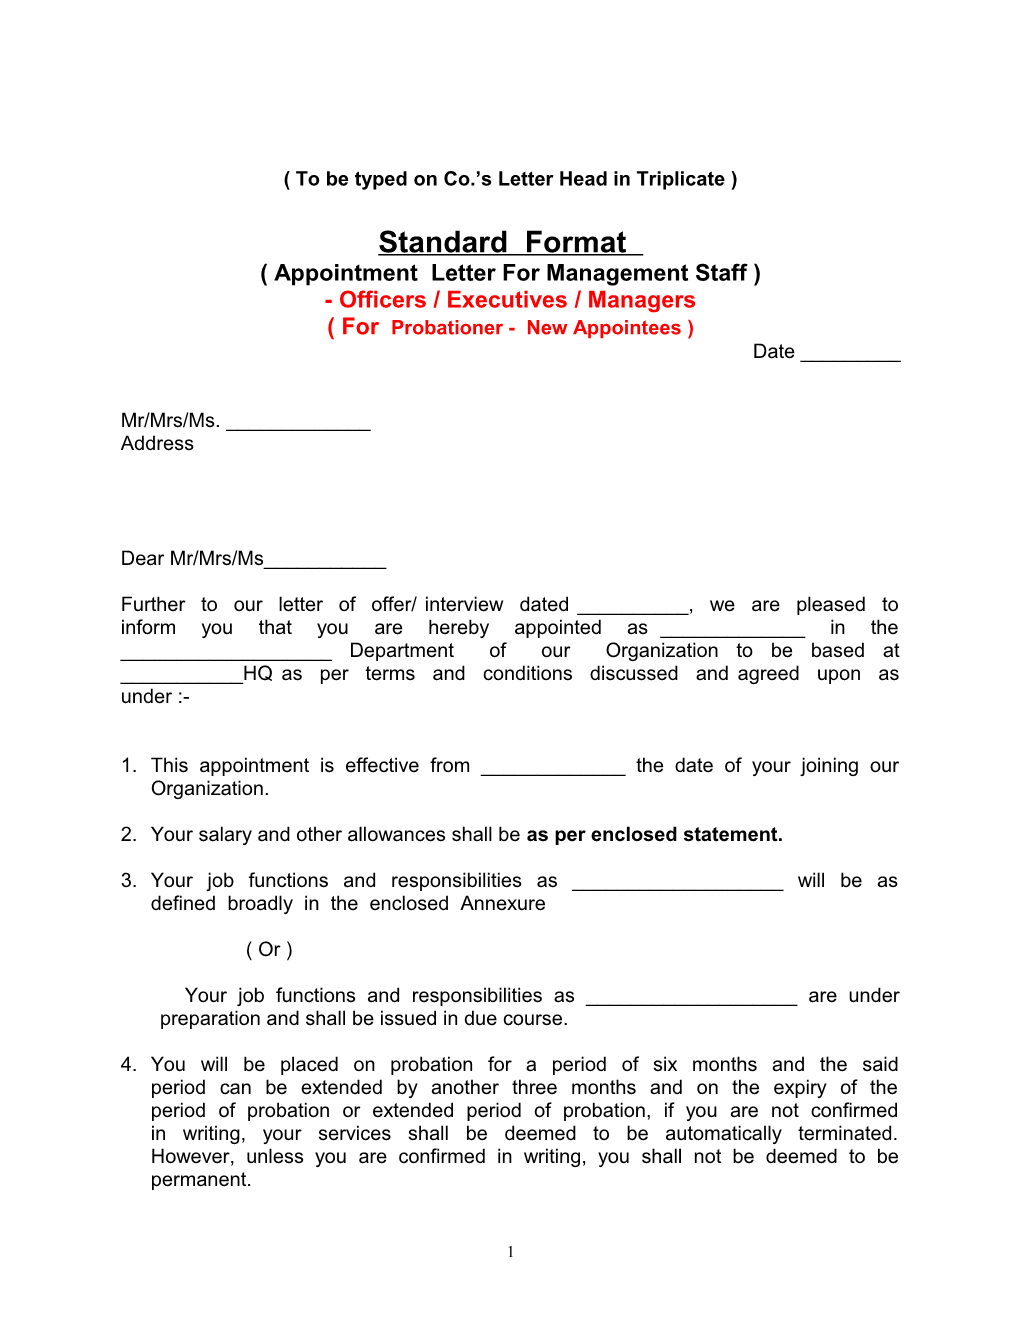 STANDARD FORMAT of APPOINTMENT LETTER for Management Staff